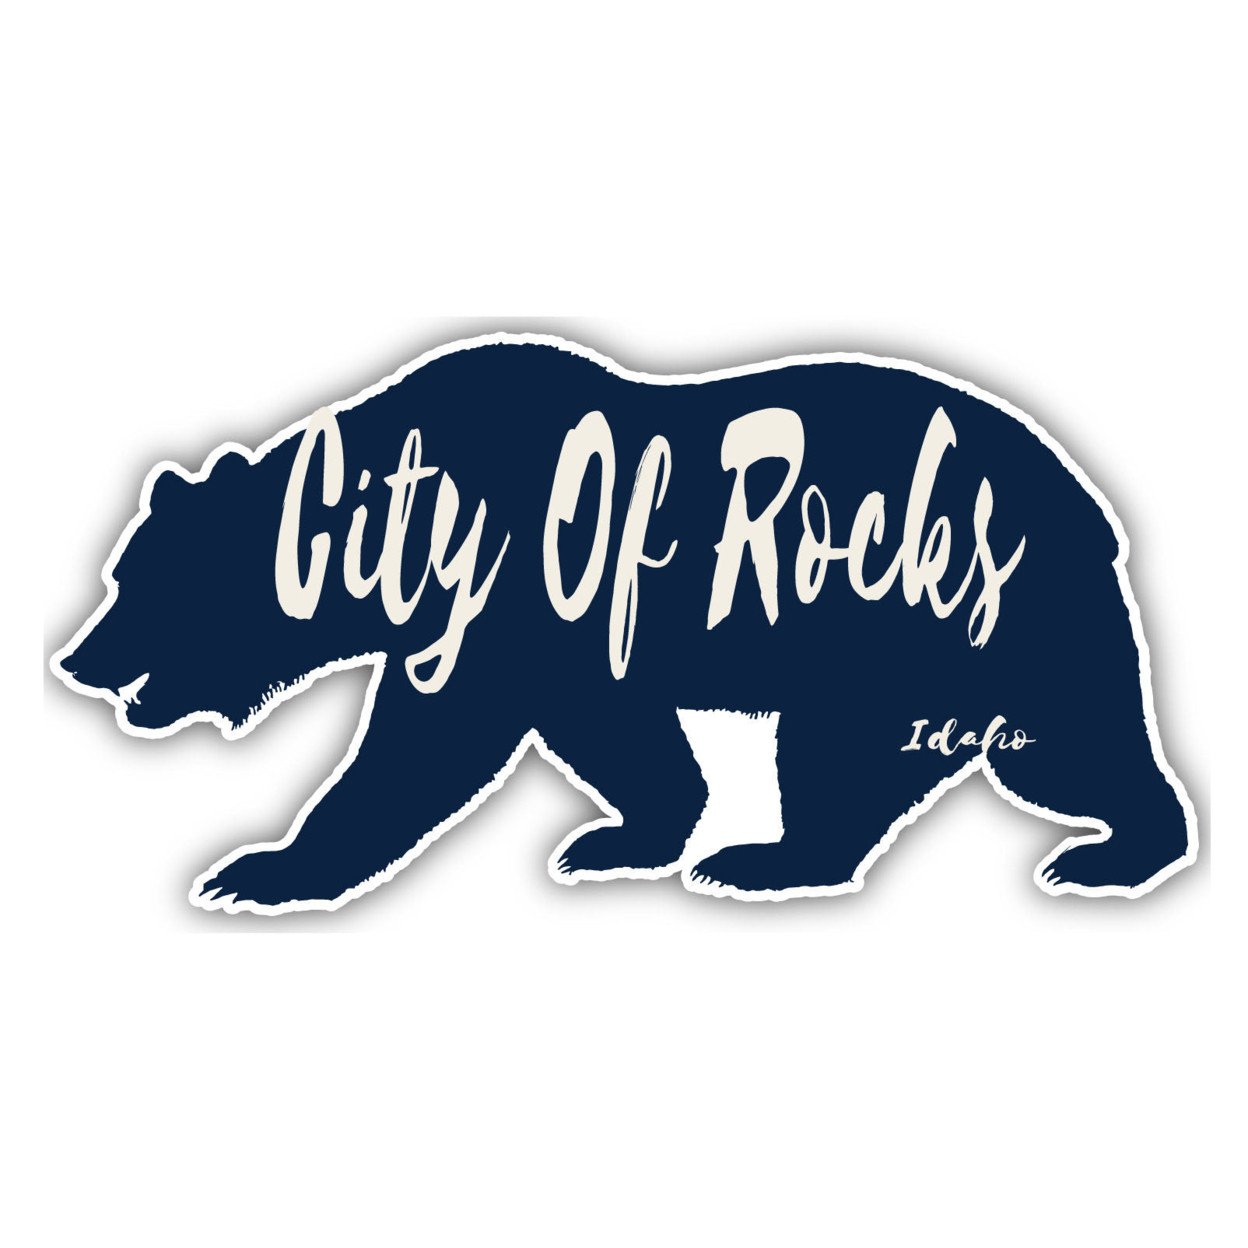 City Of Rocks Idaho Souvenir Decorative Stickers (Choose Theme And Size) - 4-Pack, 6-Inch, Bear